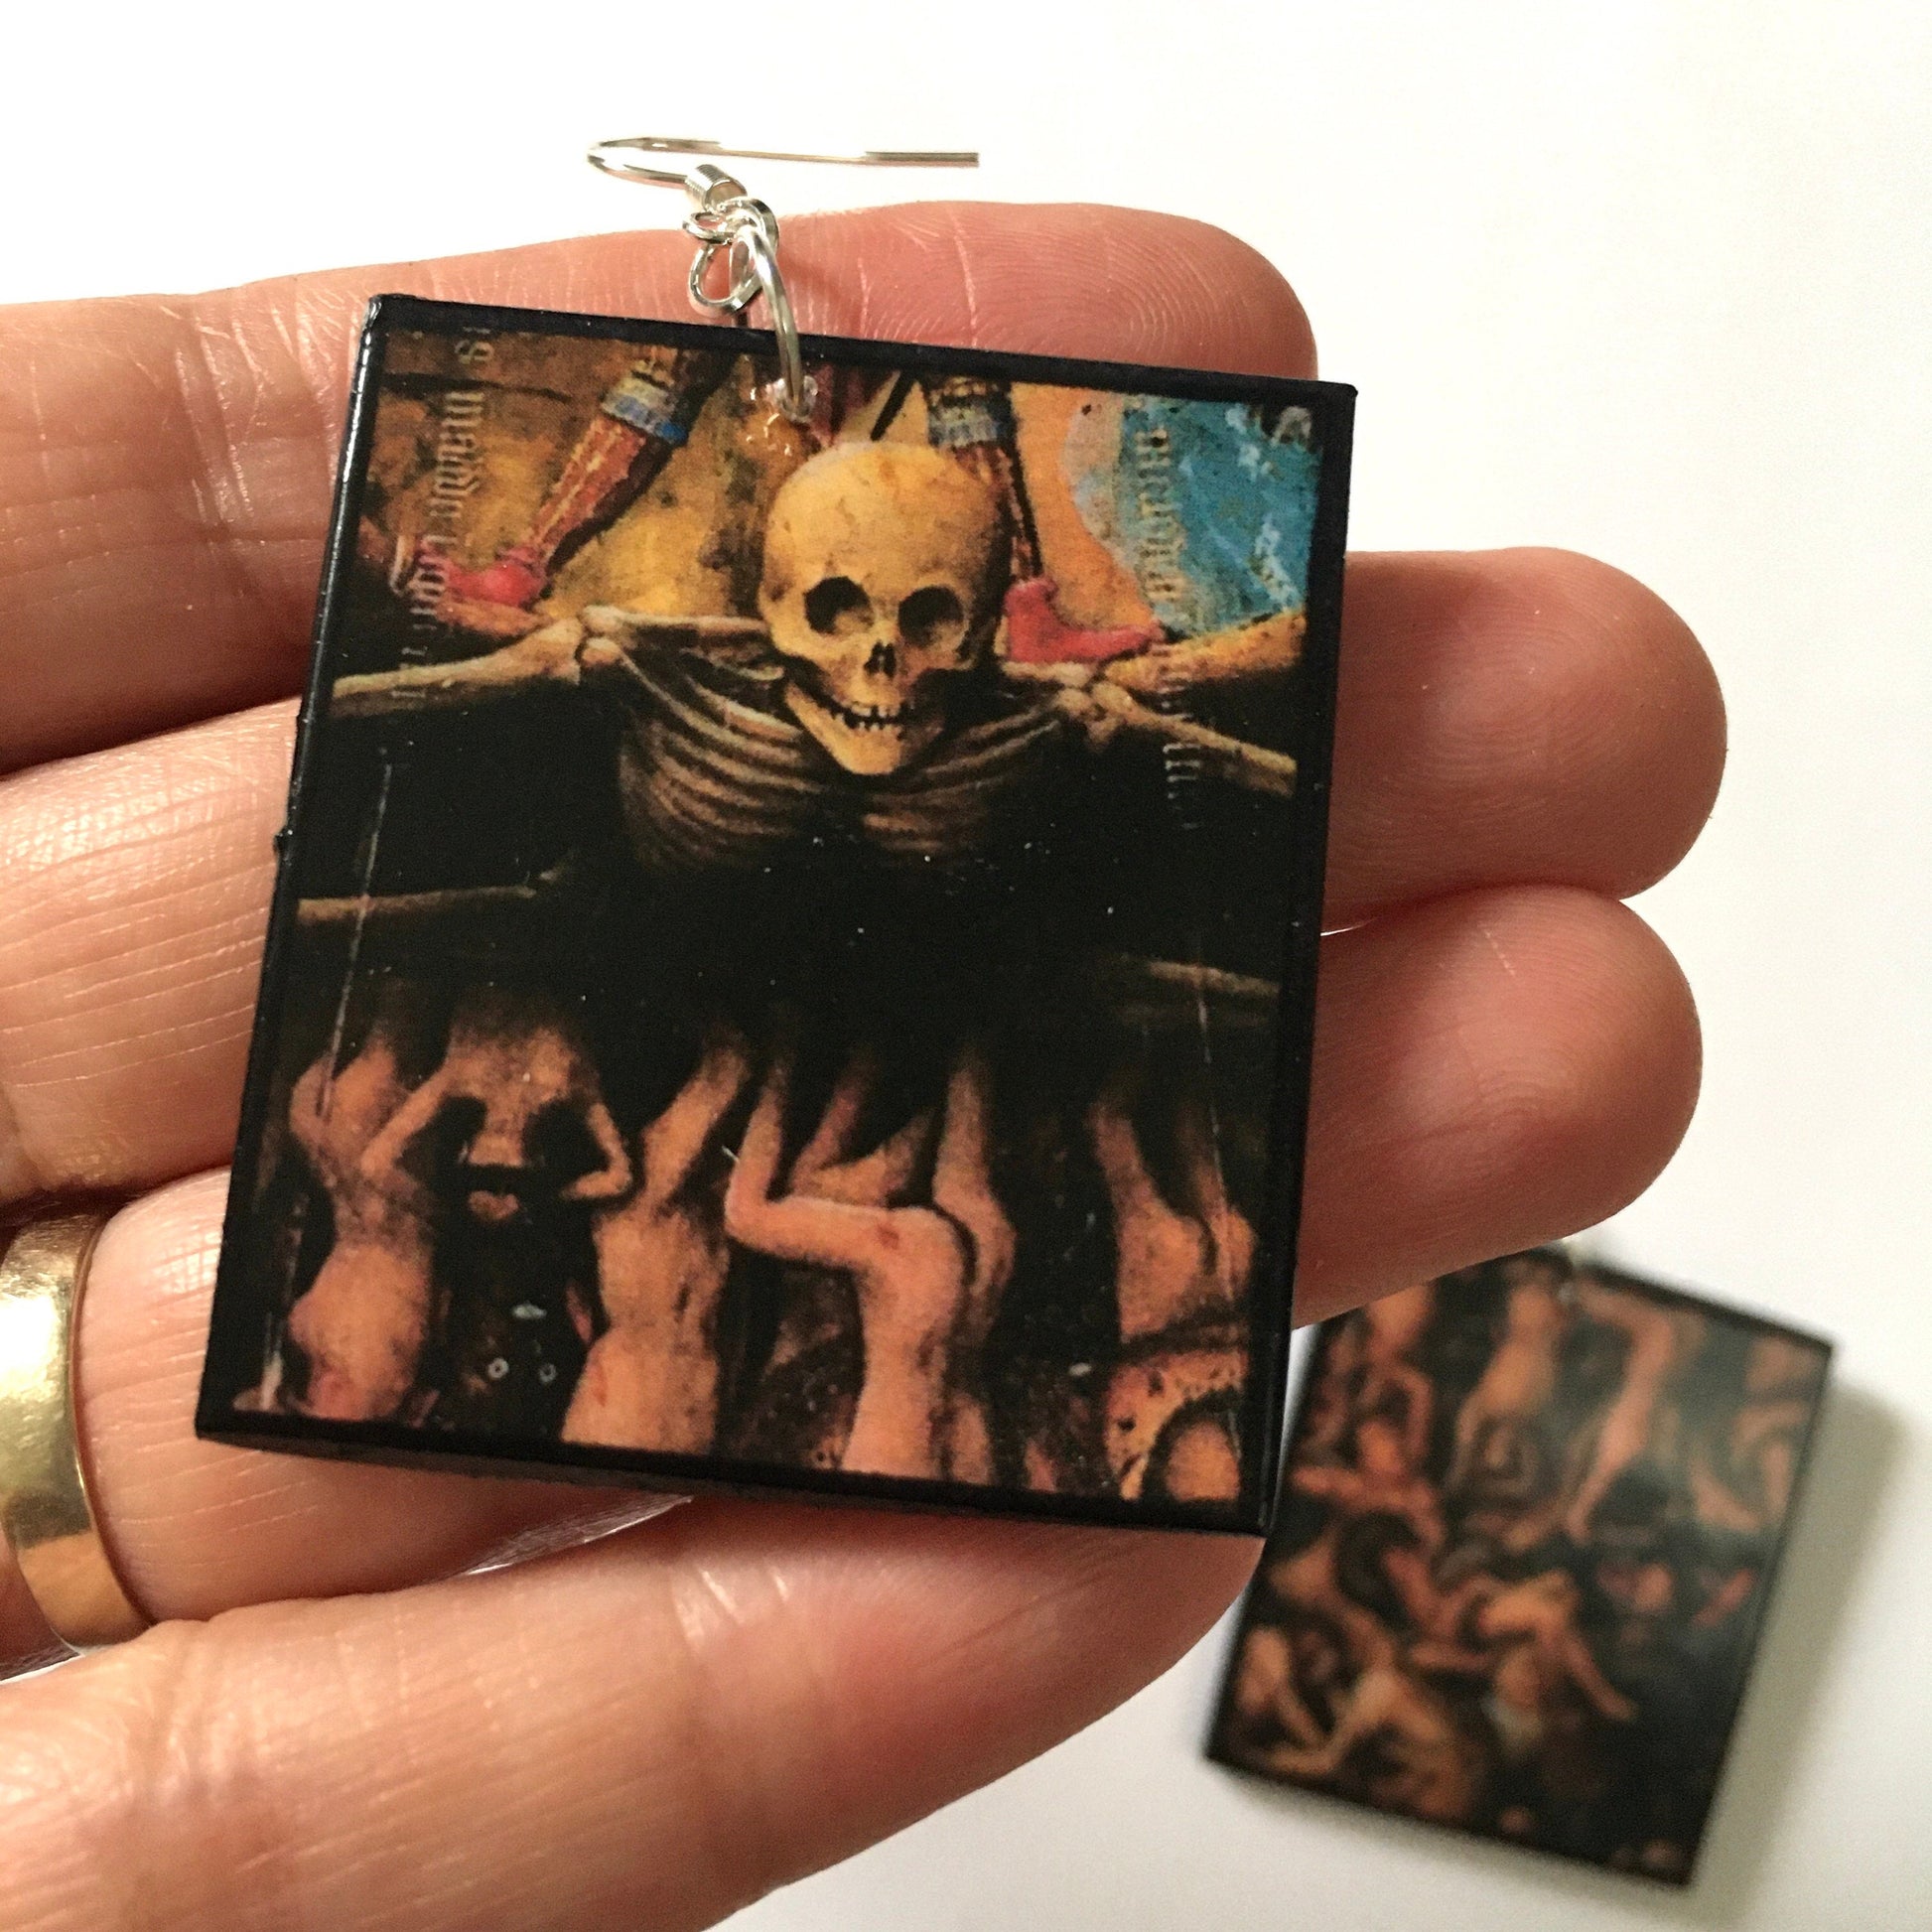 obljewellery statement, artsy gifts. The earrings represent a detail of the gothic painting” The Crucifixion; The Last Judgment” by Jan Van Eyck